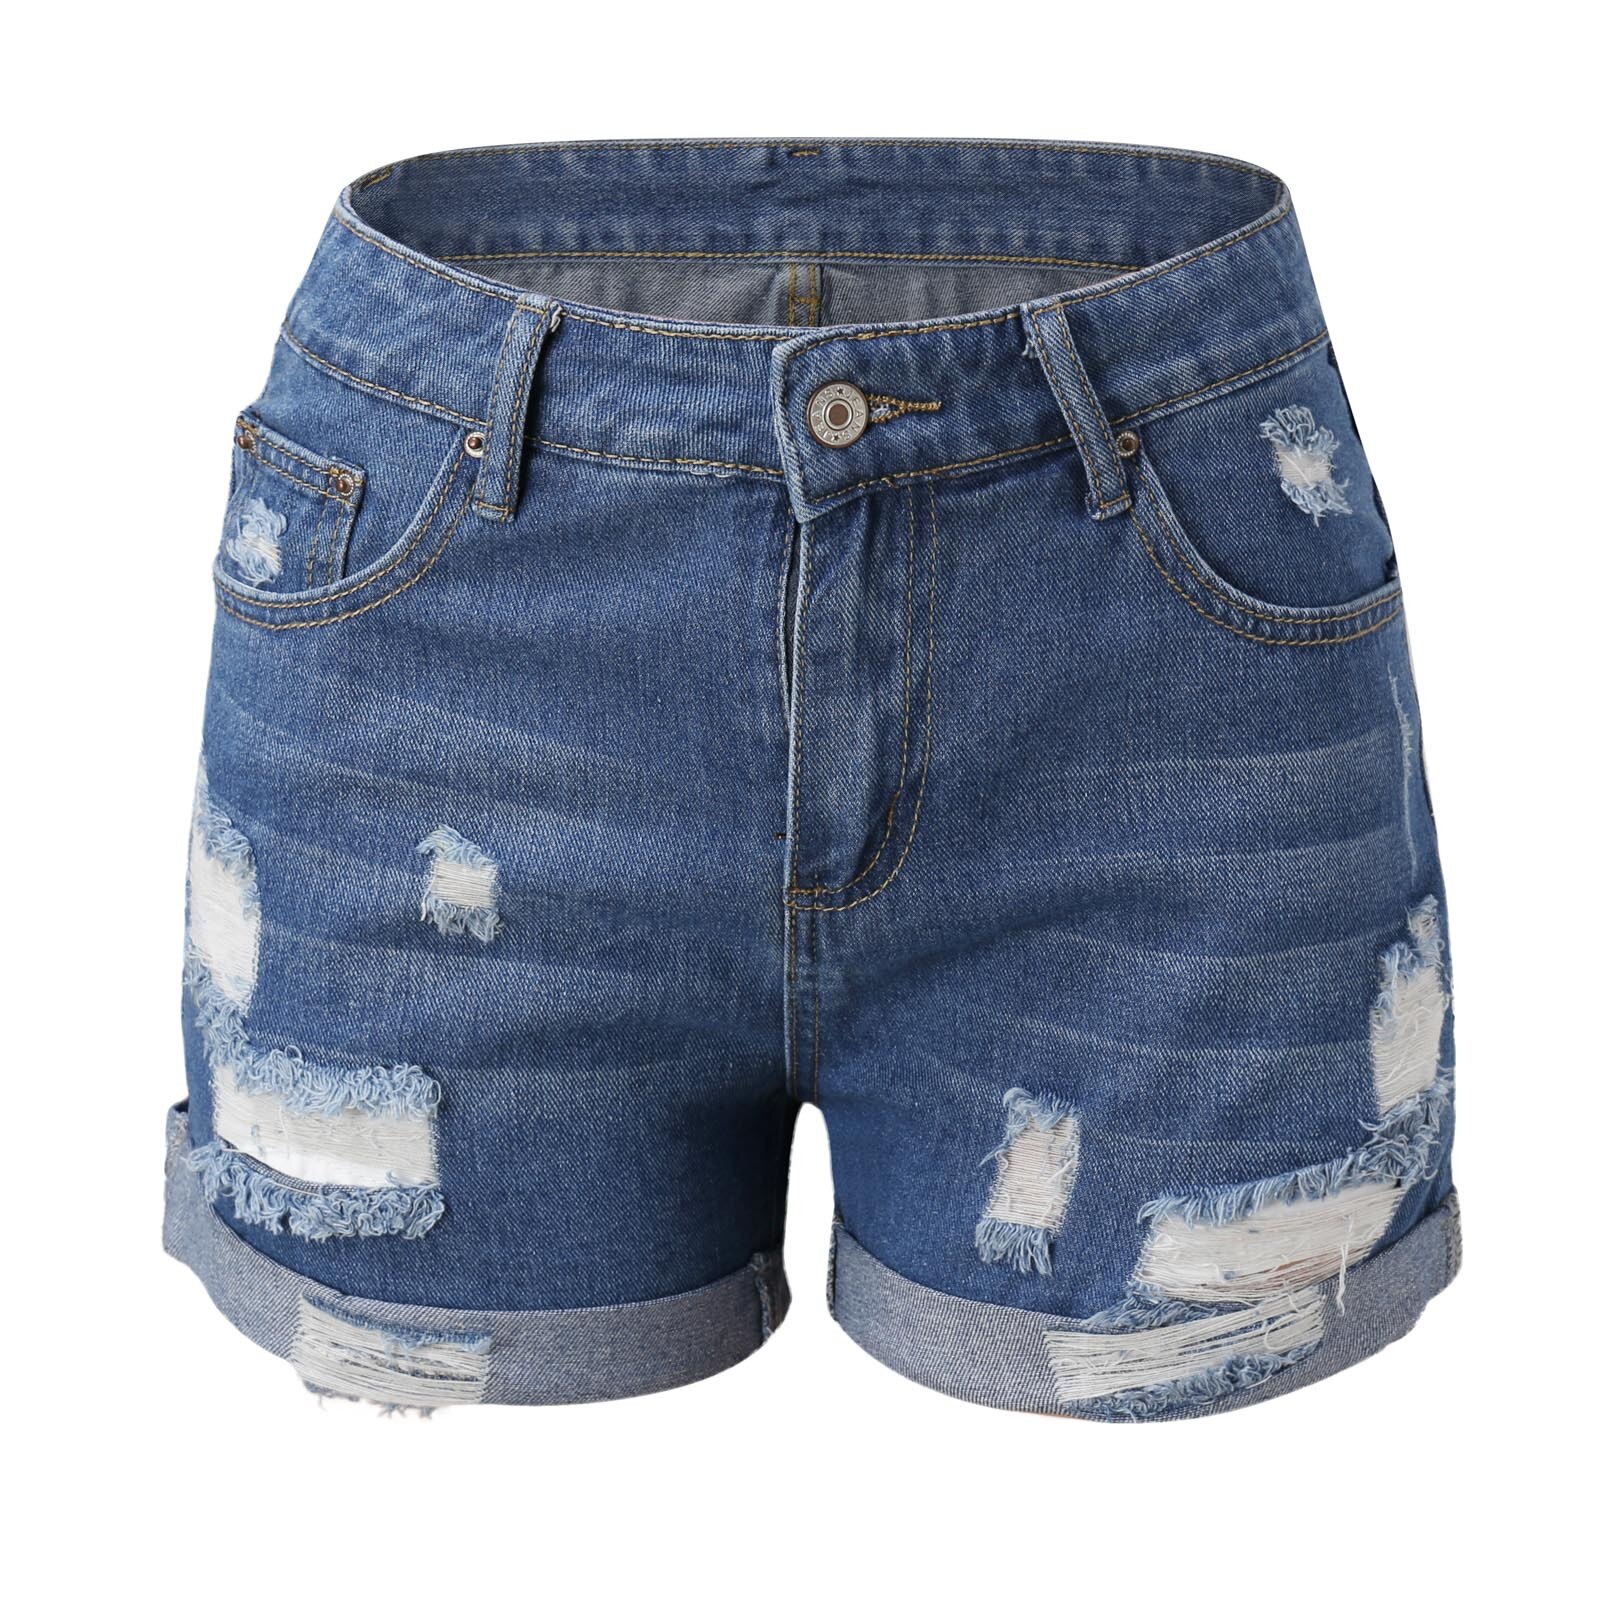 Jean Shorts Womens Summer Pants Sexy Jeans High Waist Slim Hole Shorts Pants With Pockets